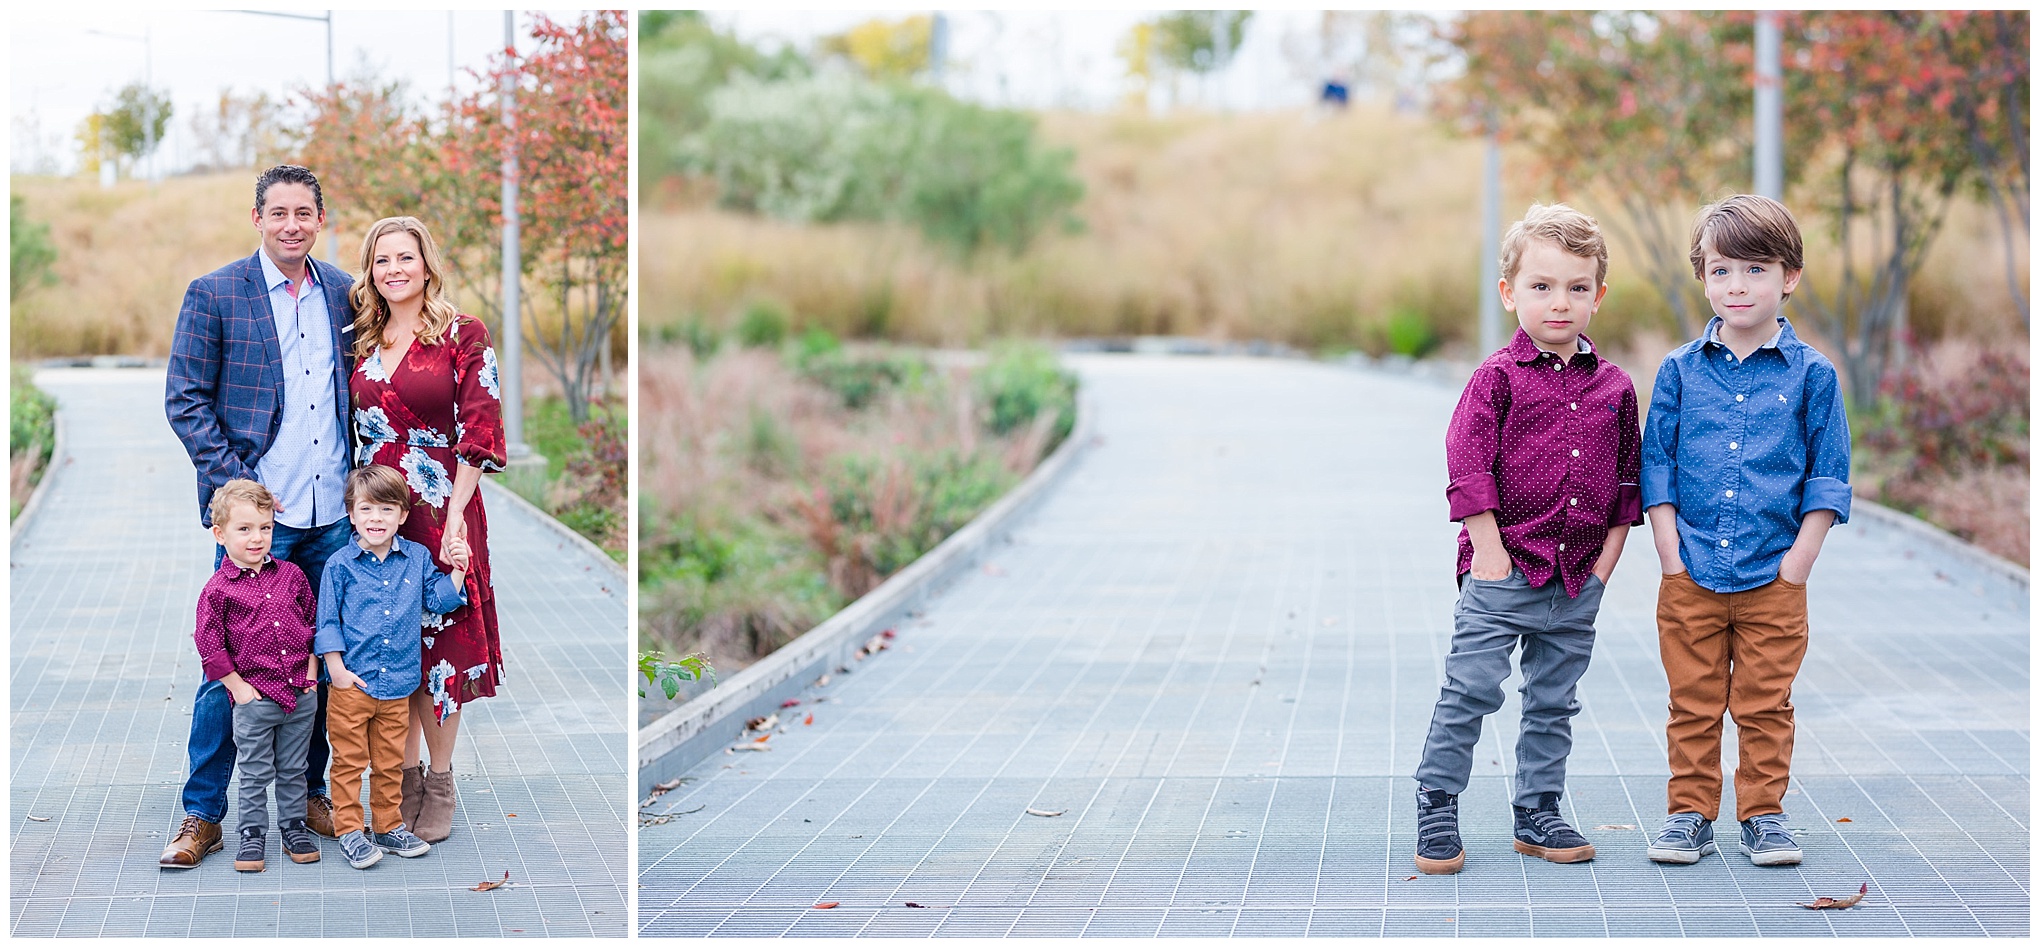 autumn Arlington family photos, family photos, family of four, Arlington, Arlington photographer, photo shoot style guide, style guide, chambray shirt, twins, fraternal twins, twin boys, coordinating family